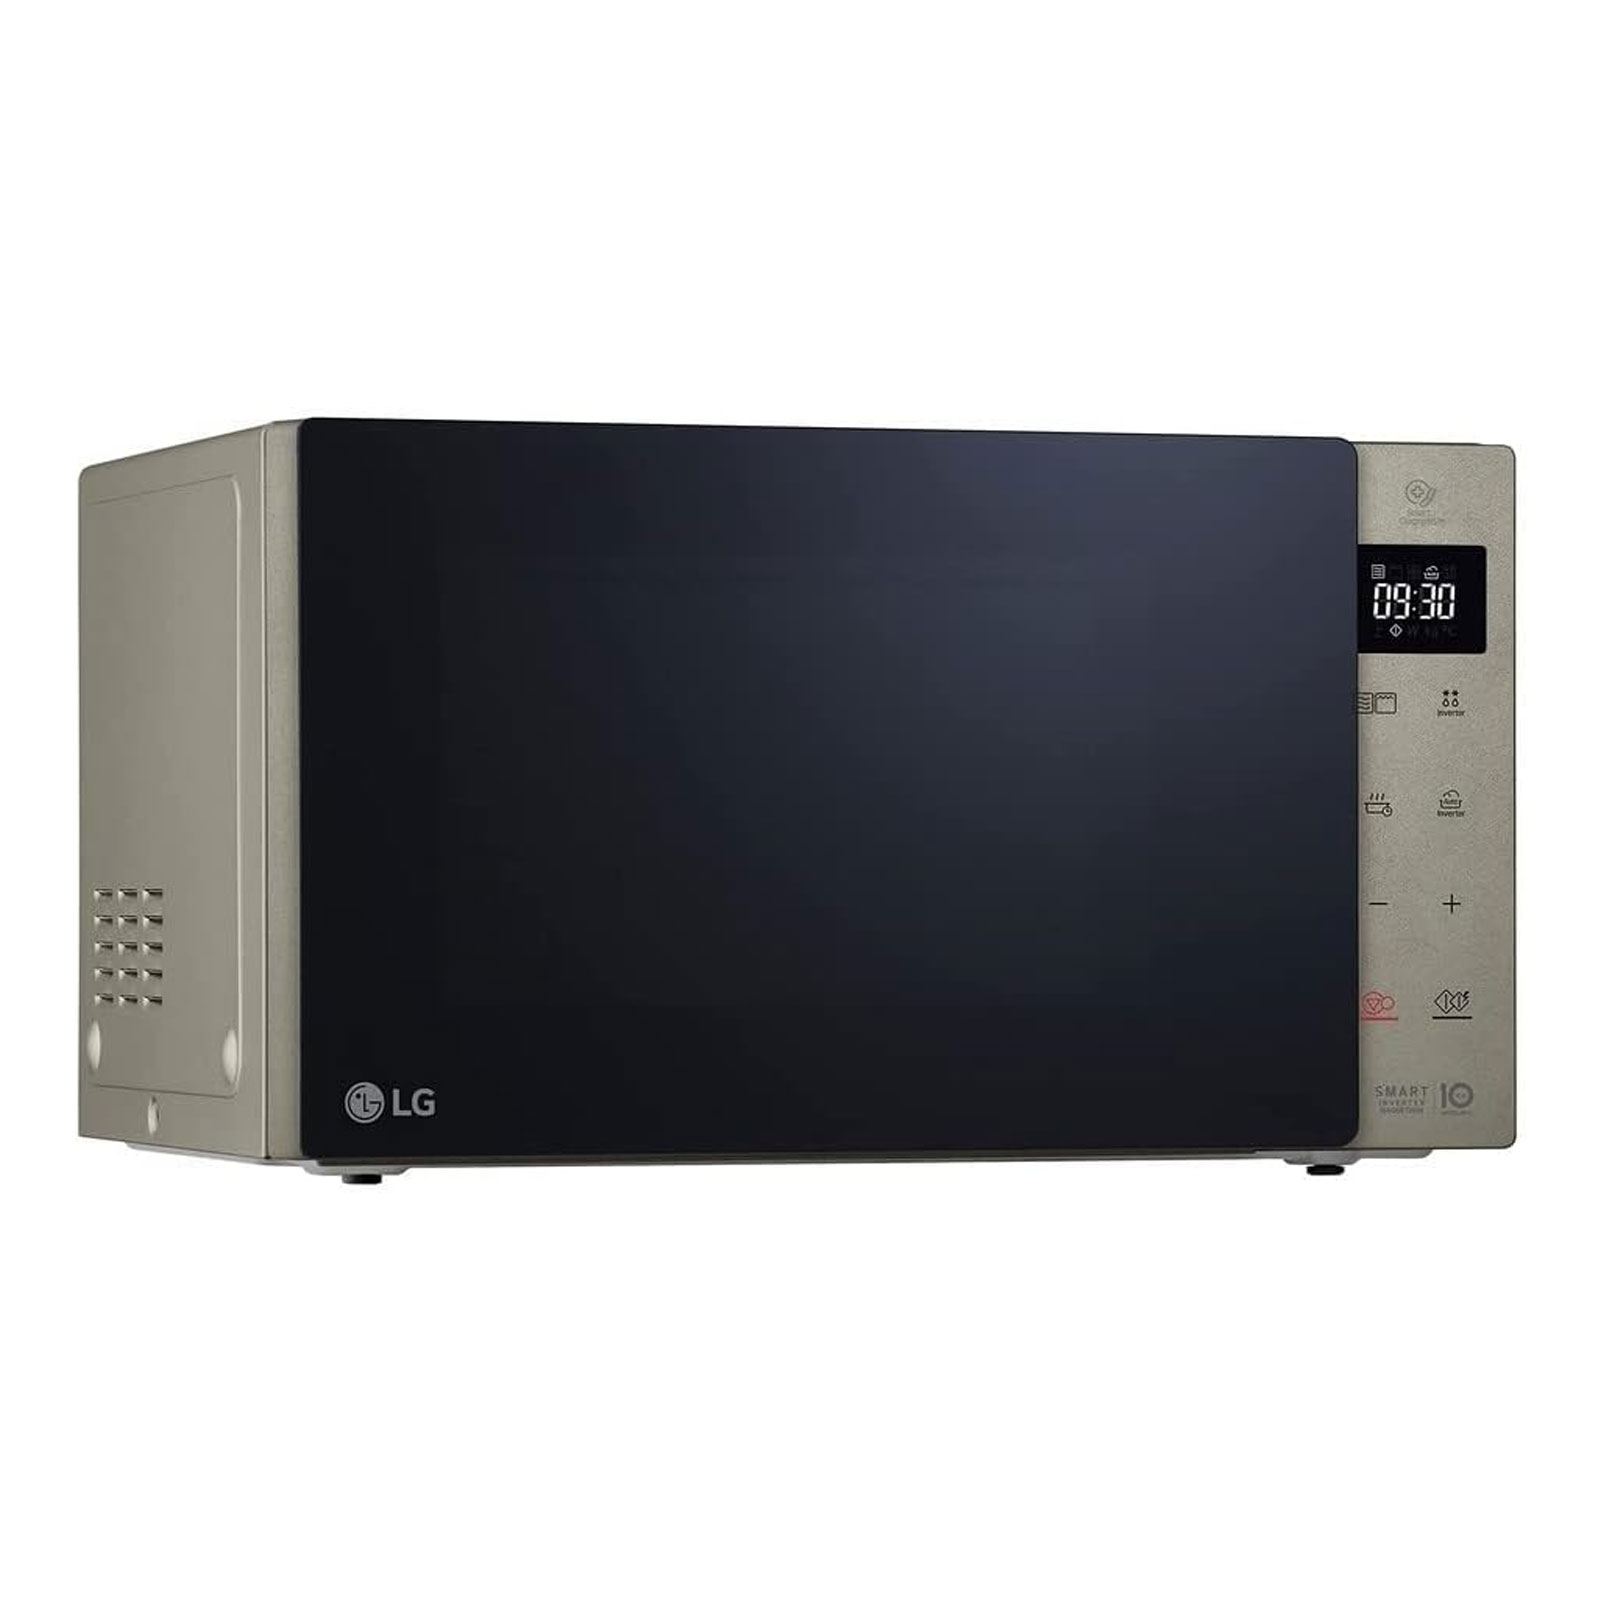 LG Electronics MH6535NBS Mikrowelle mit Grill  Smart Inverter Technologie 1000 W  25 L